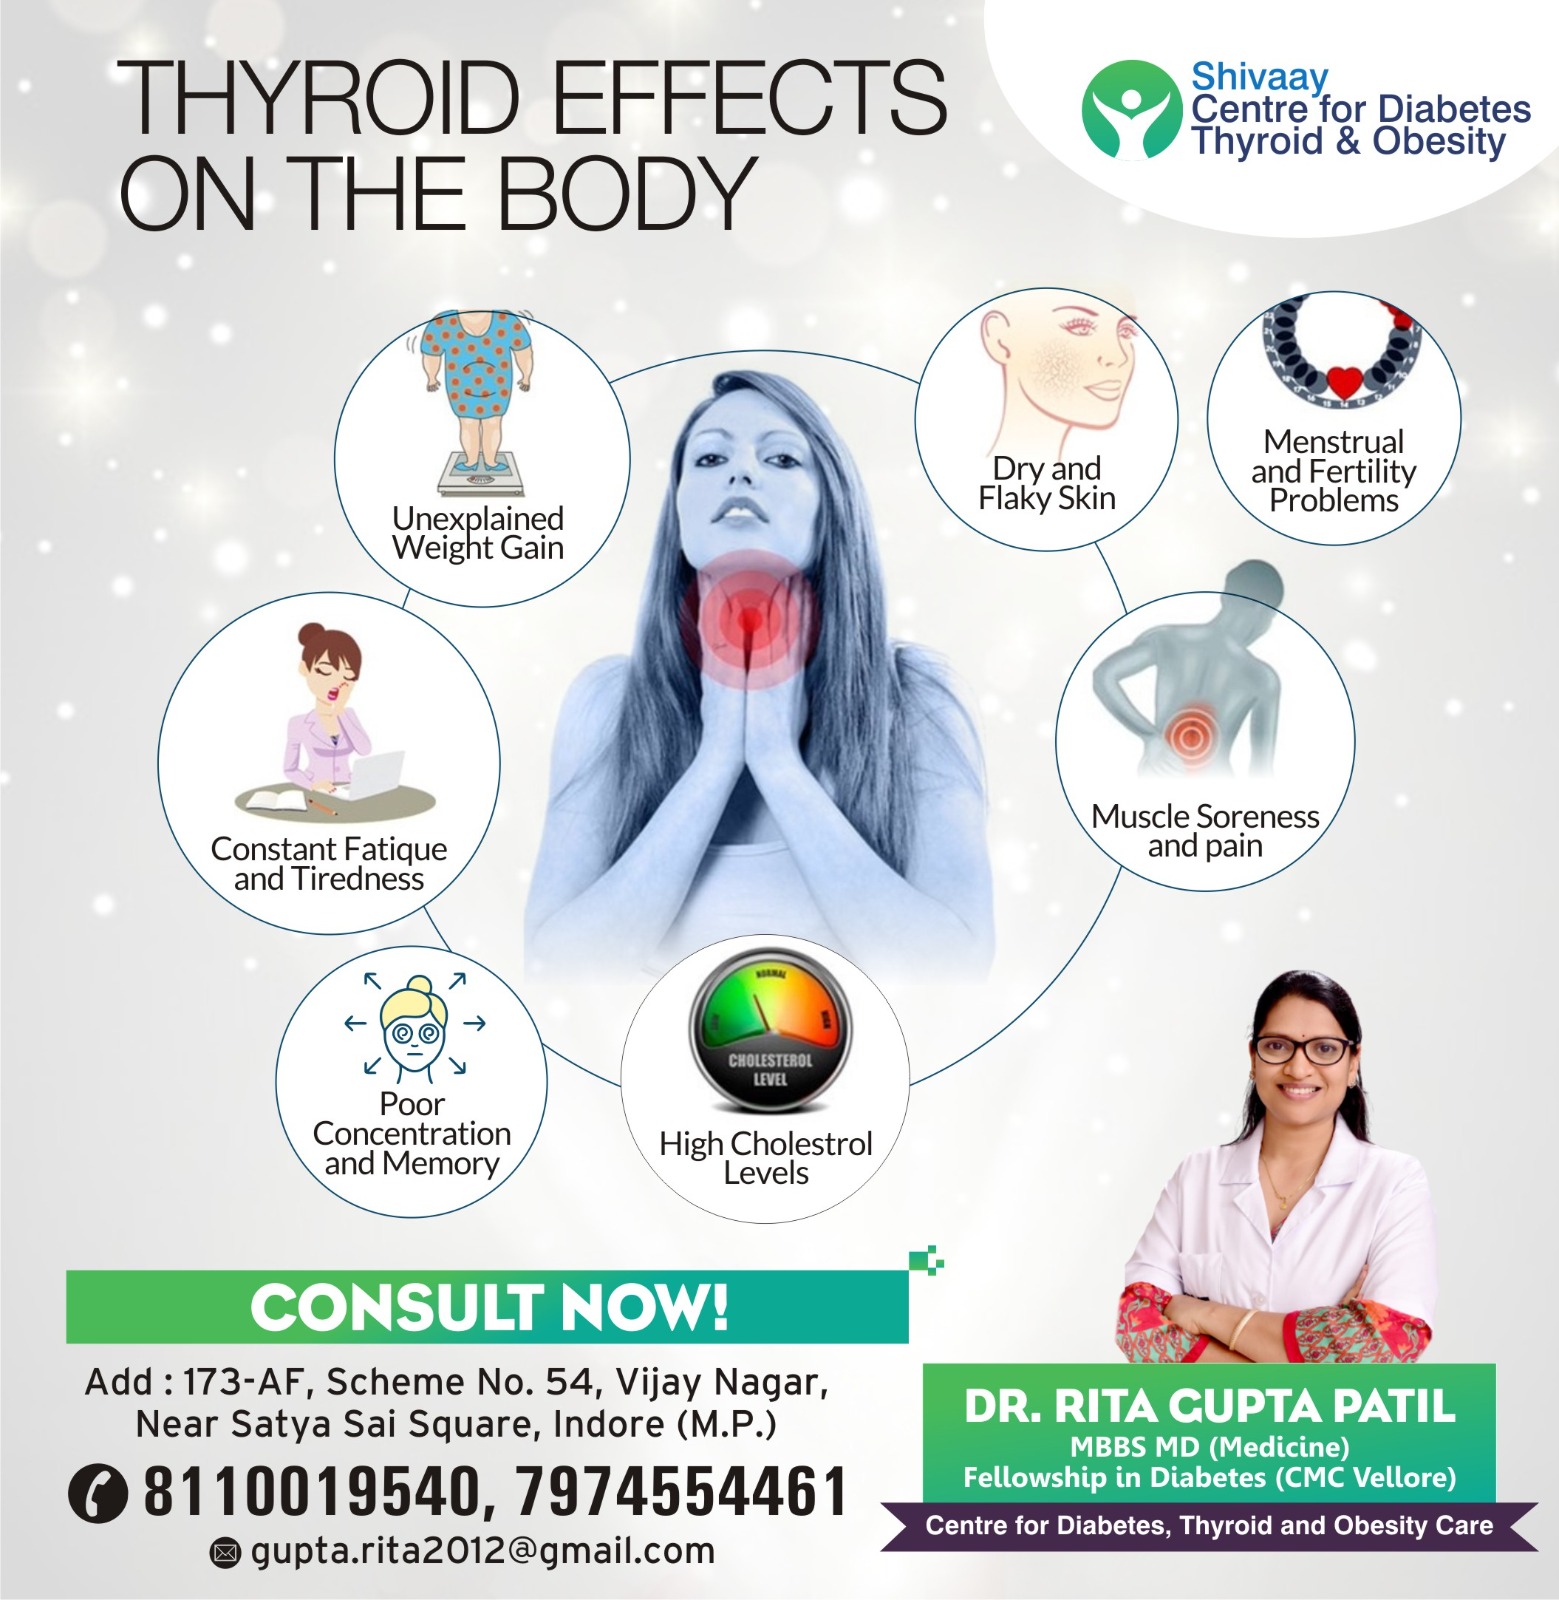 BEST THYROID CONTROL SPECIALIST IN INDORE